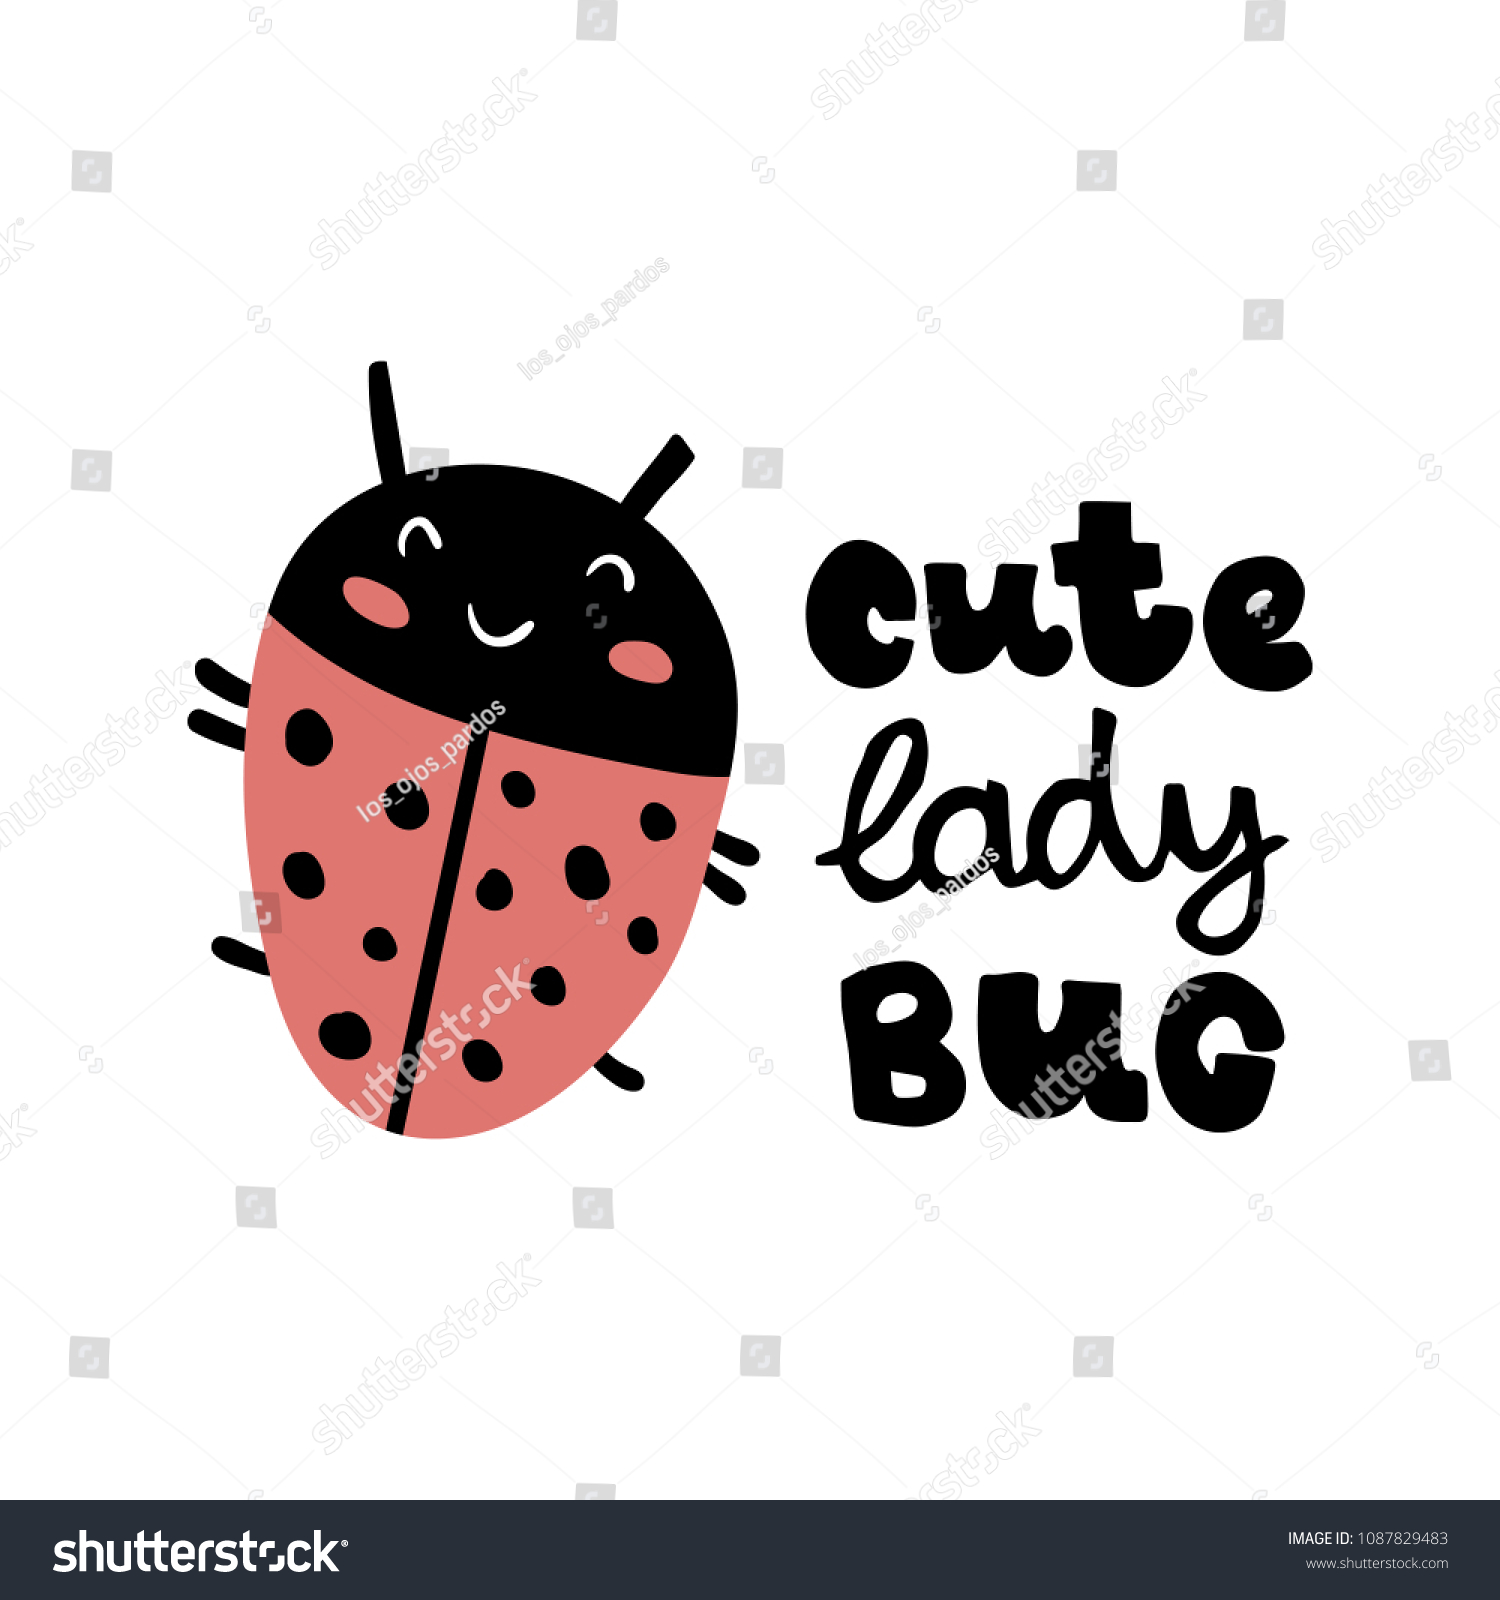 15,463 Cute lady bug Images, Stock Photos & Vectors | Shutterstock